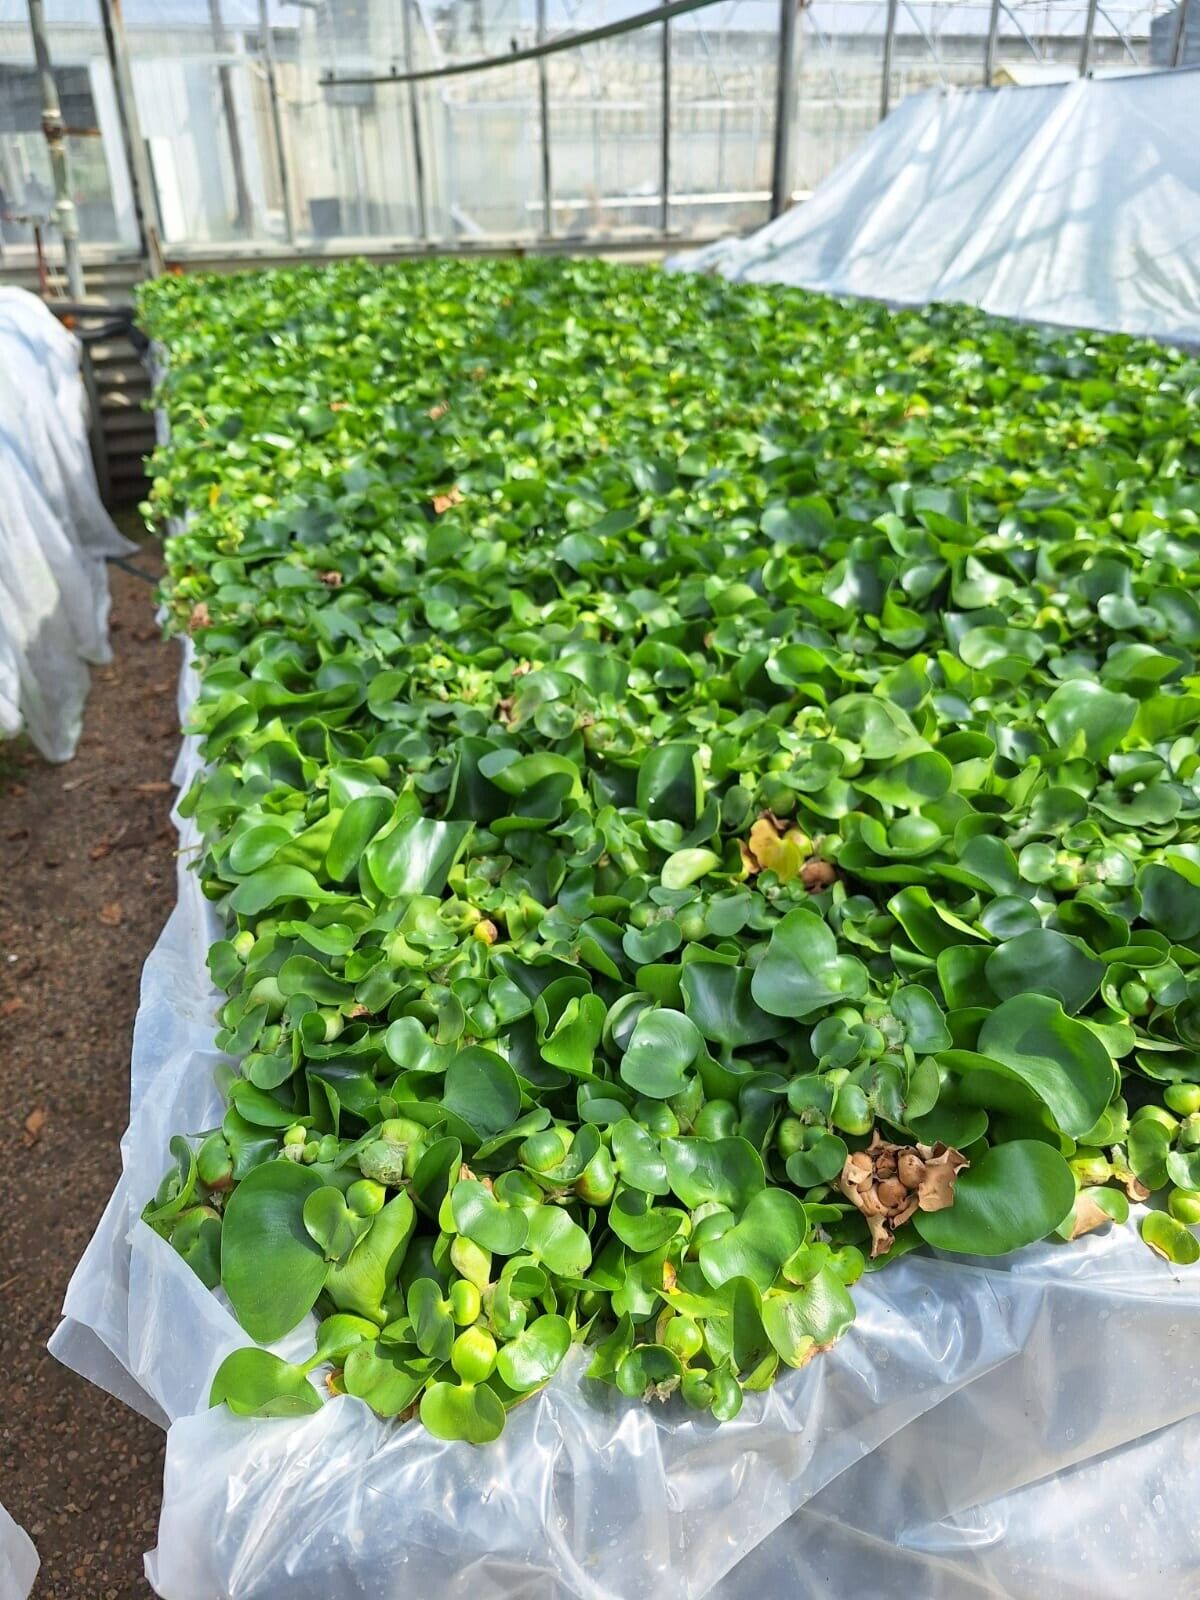 500 WATER HYACINTH FOR FISH PONDS